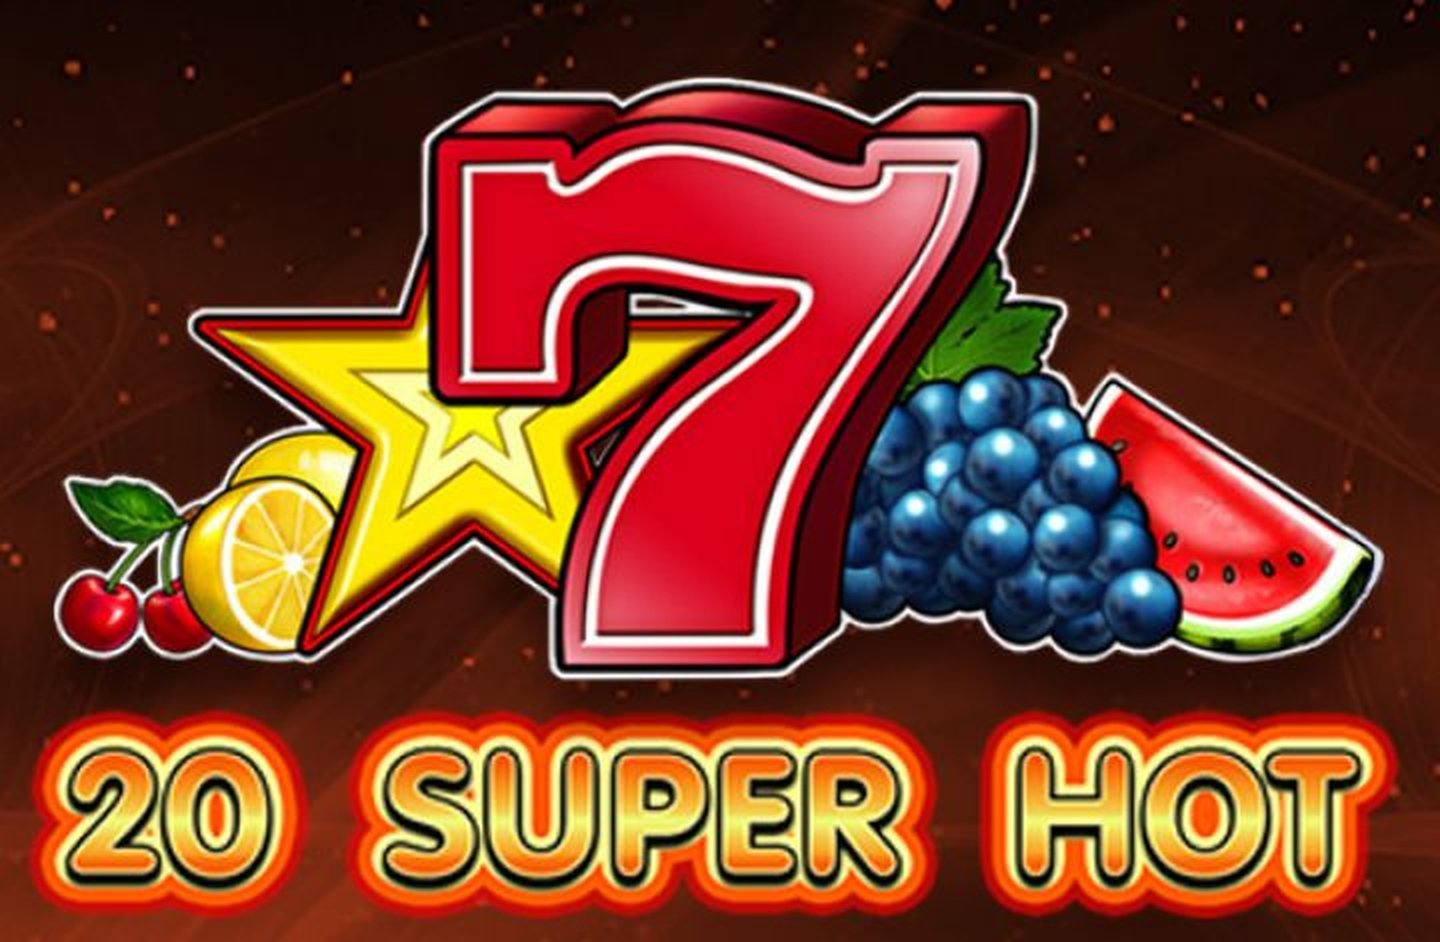 The 20 Super Hot Online Slot Demo Game by EGT